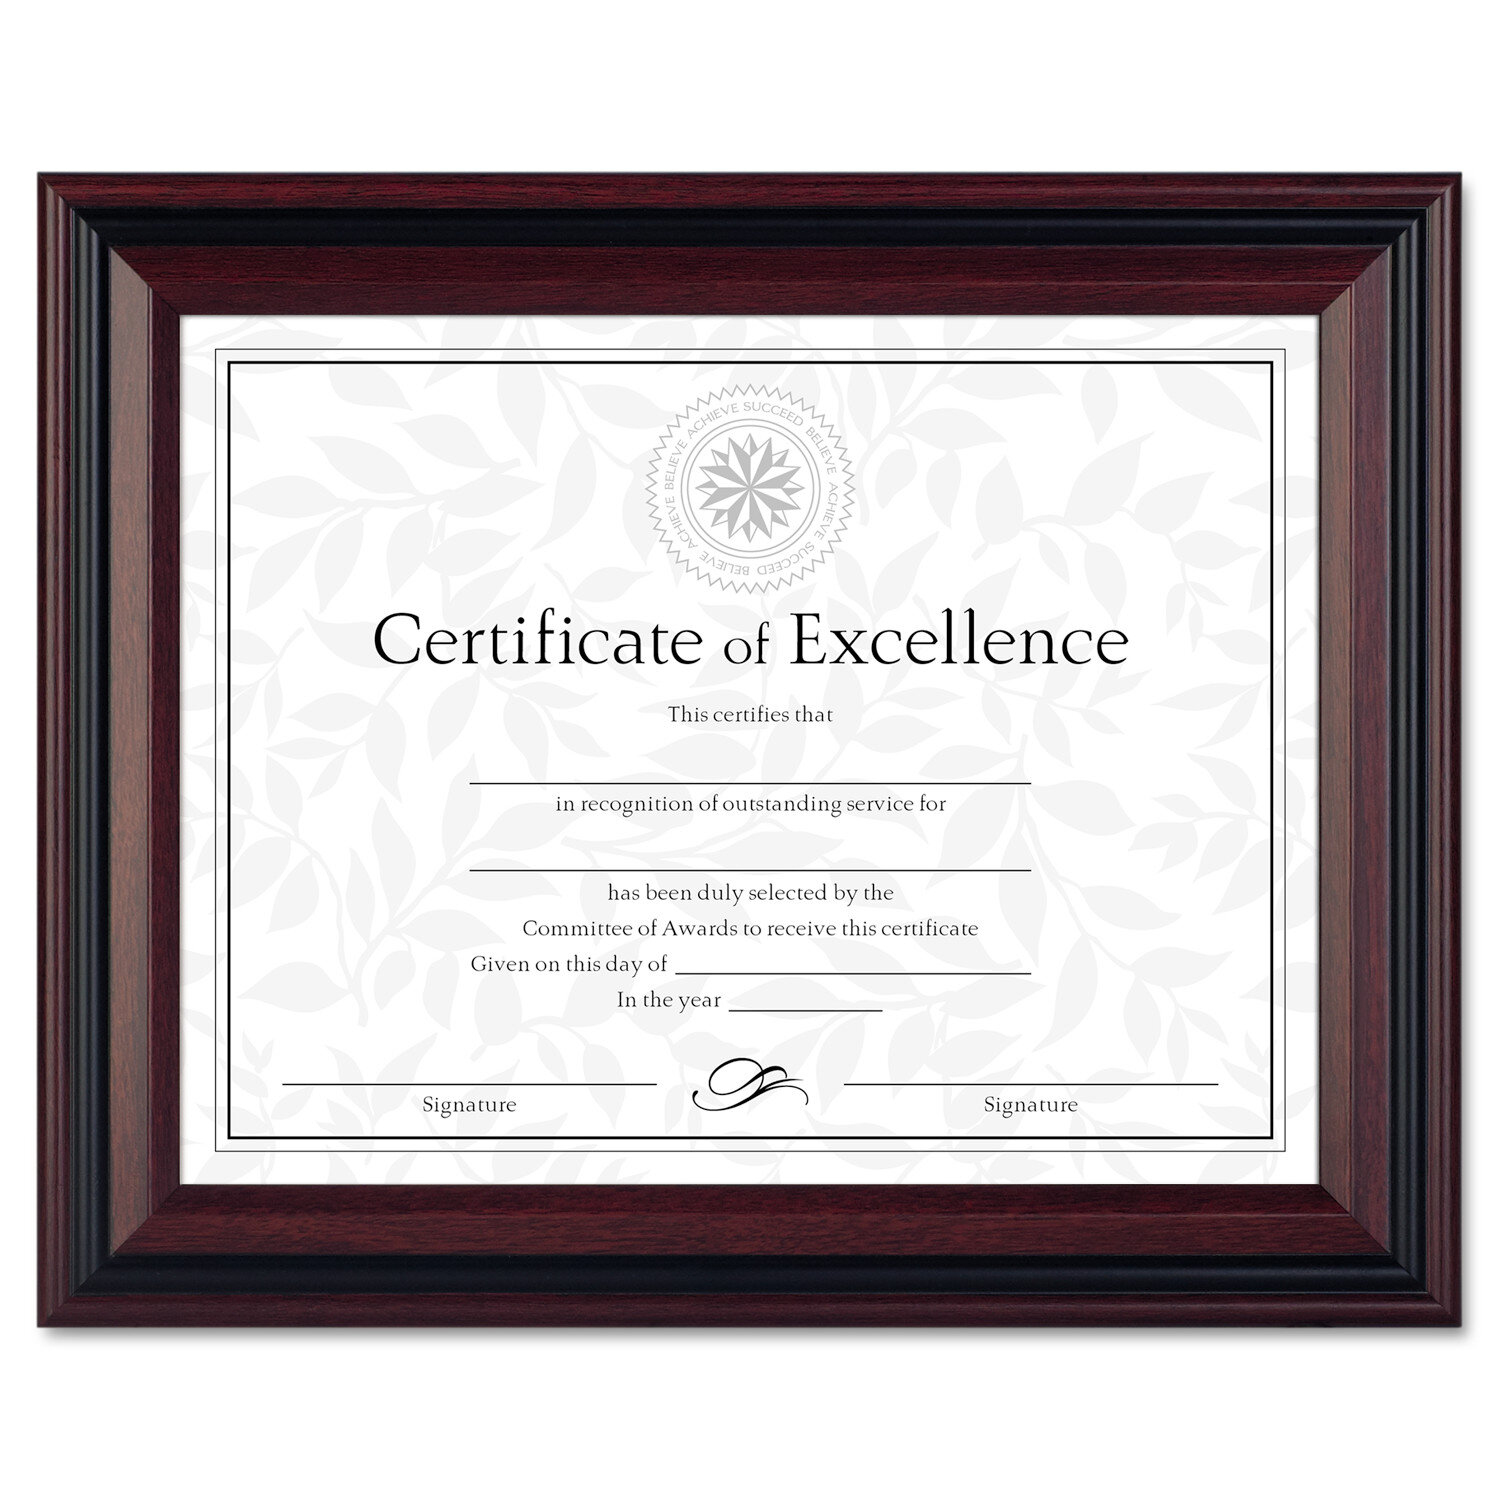 Set of 2 Pack Brown Vertical or Horizontal Display for Wall or Tabletop. ARTrend Premium 8.5x11 Certificate Diploma Frames Document Frames with Glass Fronts